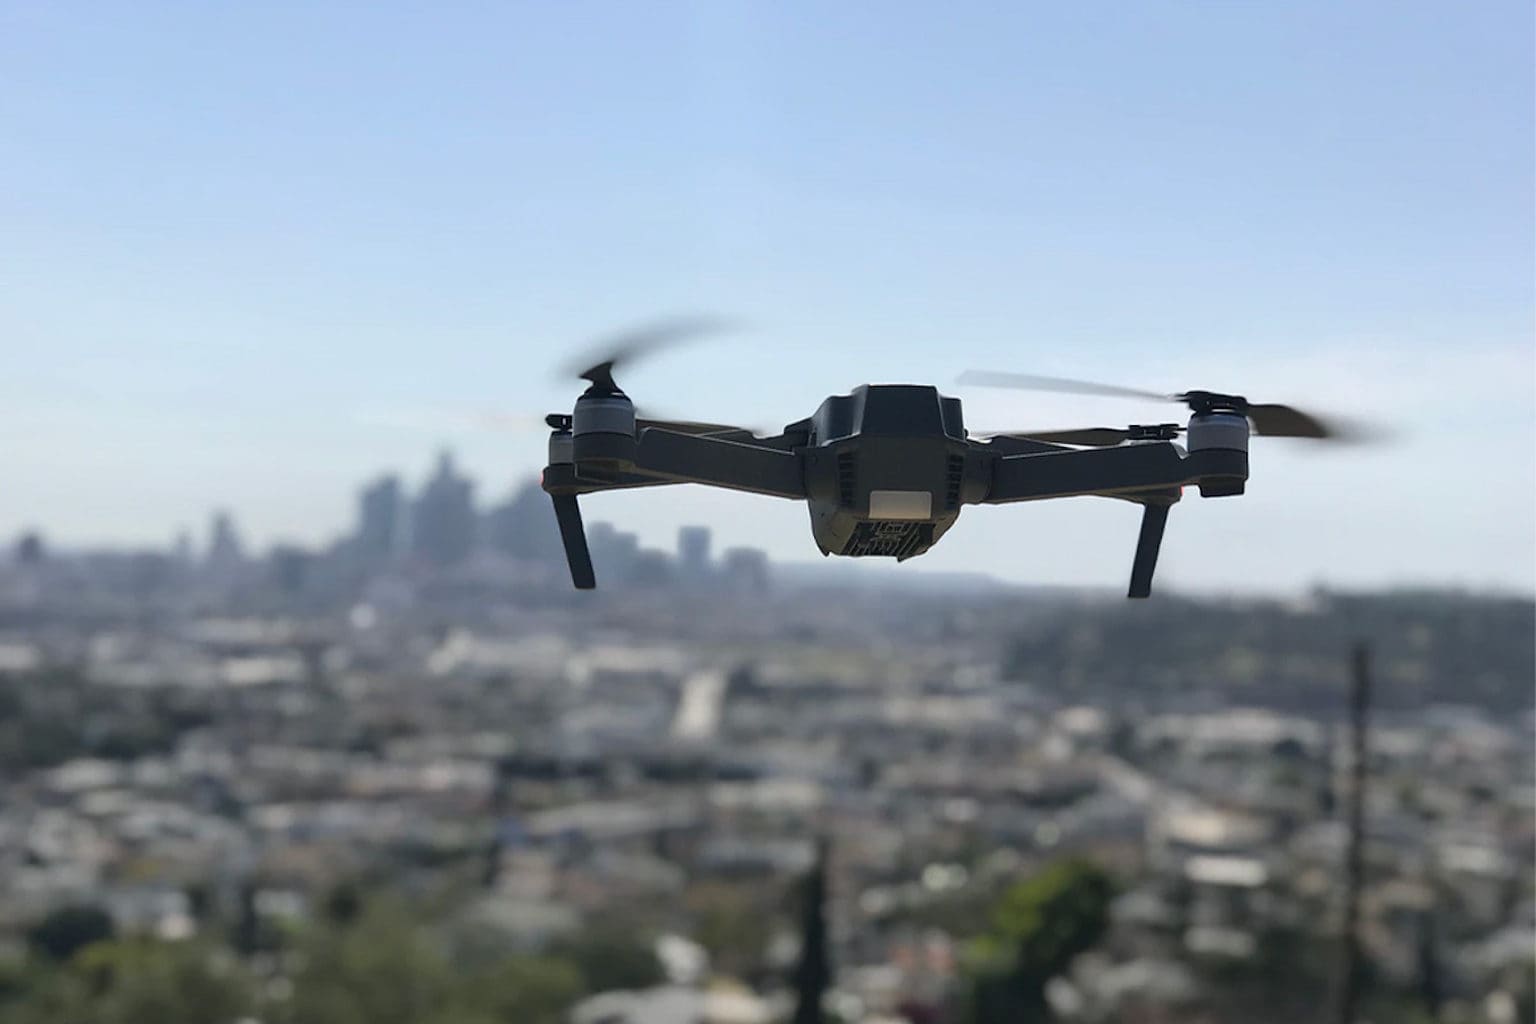 Take 50% off the 4K camera drone that anyone can fly.